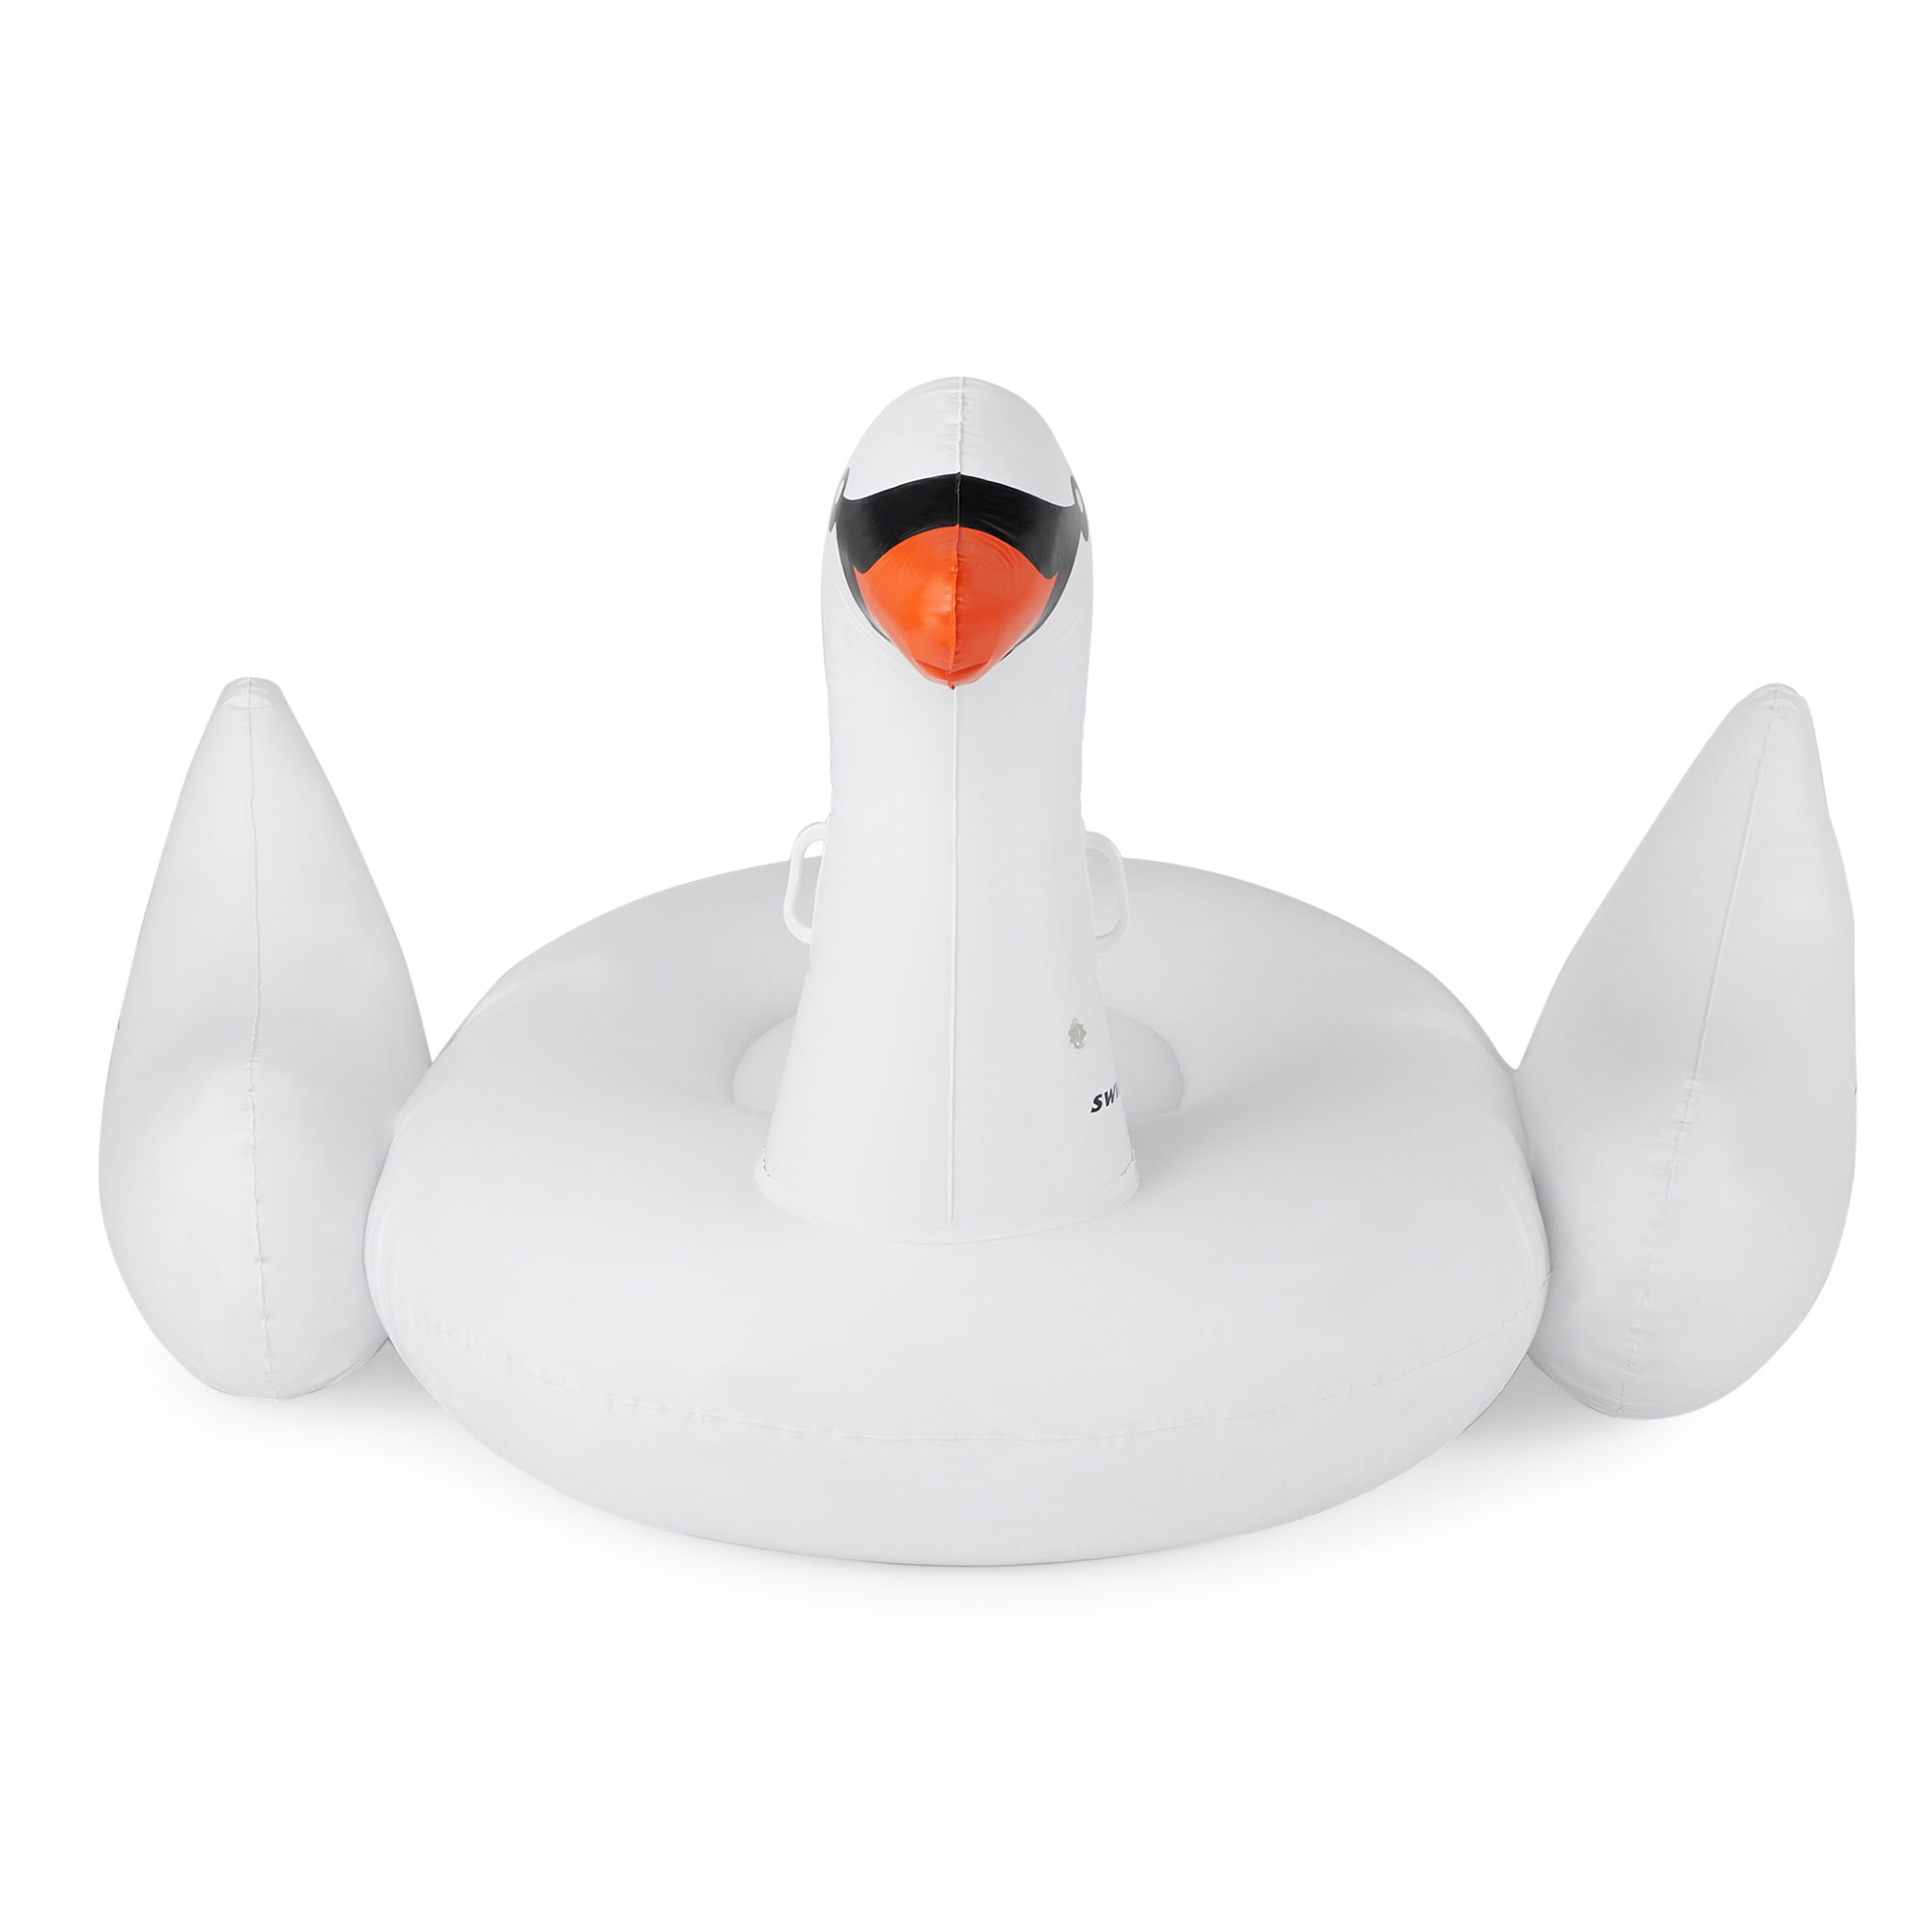 SWIMLINE ORIGINAL 90621 Giant Inflatable Swan Pool Float Floatie Ride-On Lounge W/ Stable Legs Wings Large Rideable Blow Up Summer Beach Swimming Party Lounge Big Raft Tube Decoration Toys Kids Adults - image 2 of 7